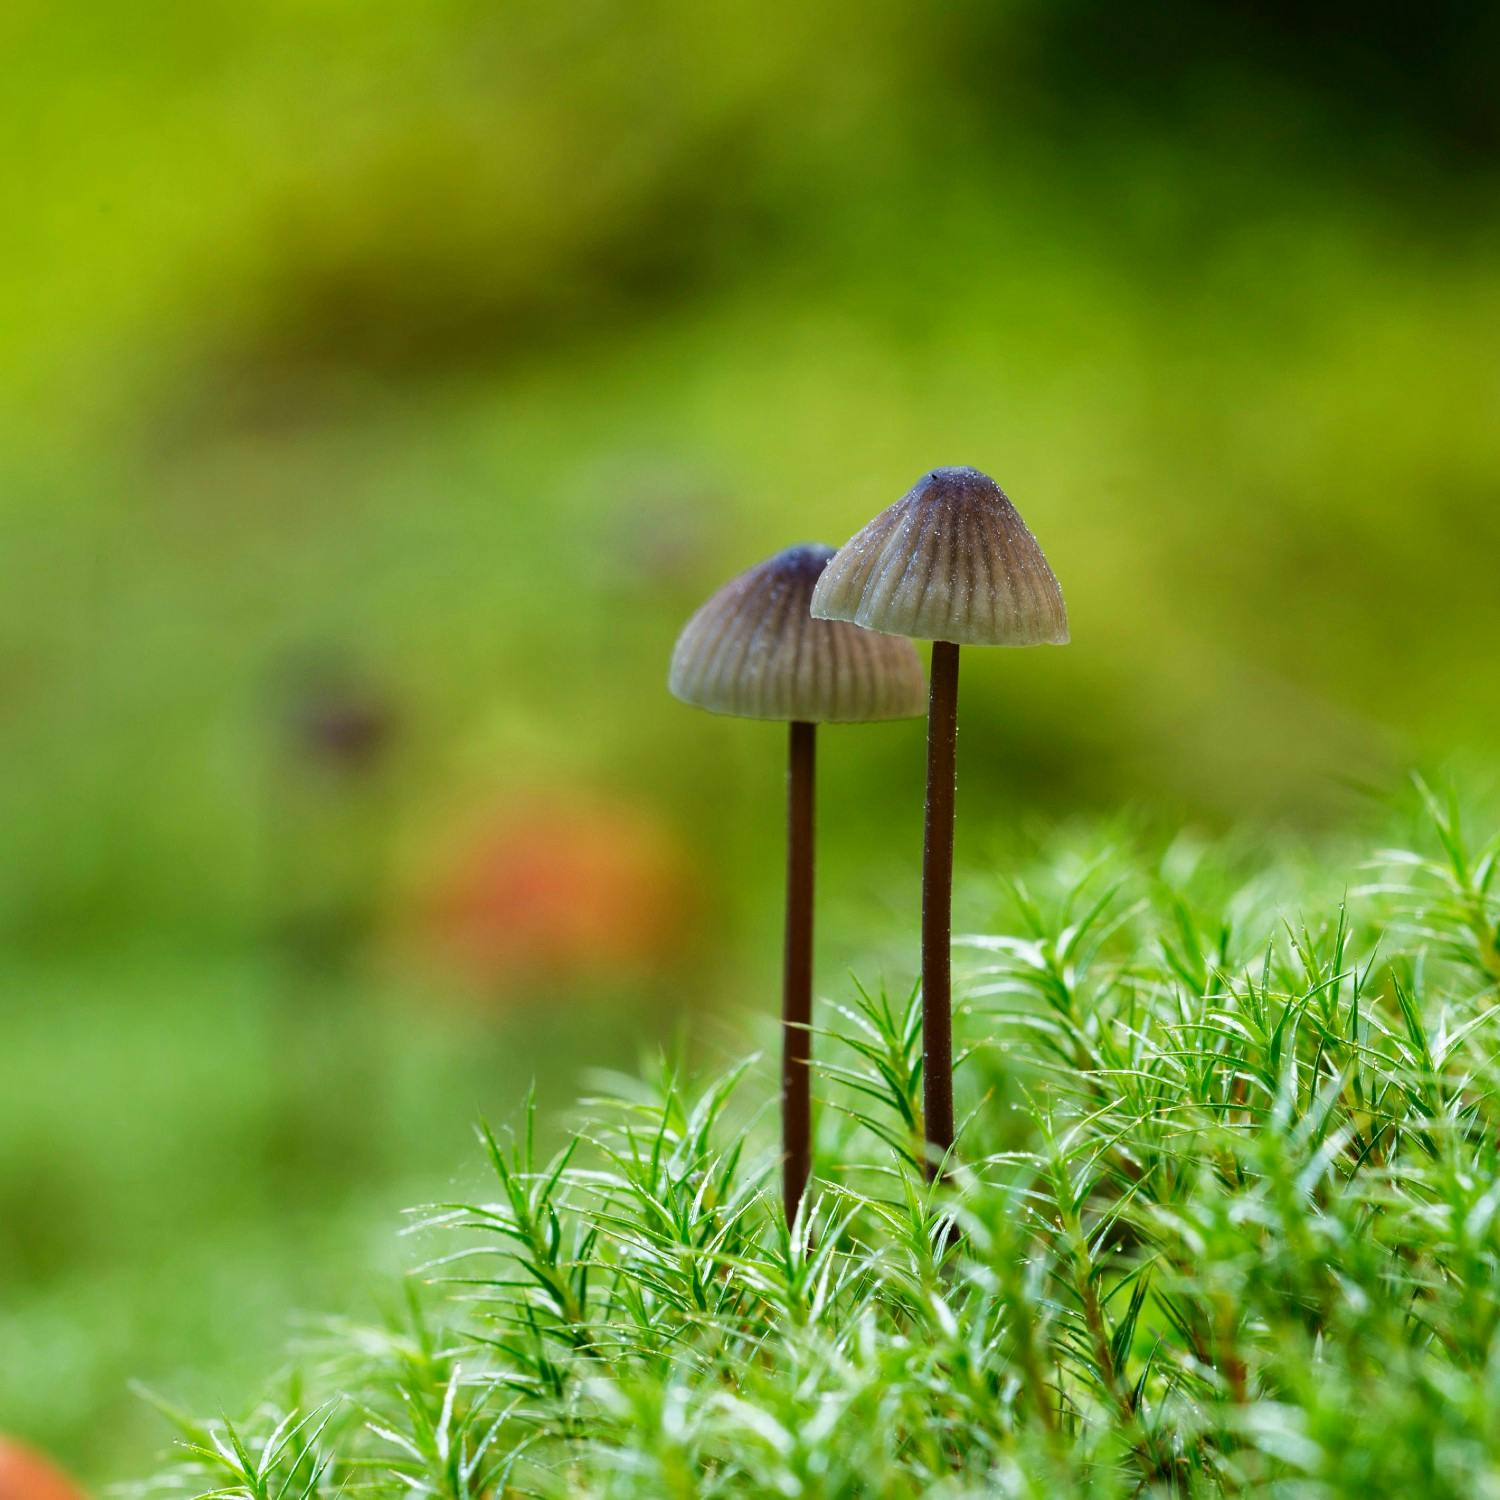 Can a substance found in magic mushrooms alleviate depression?